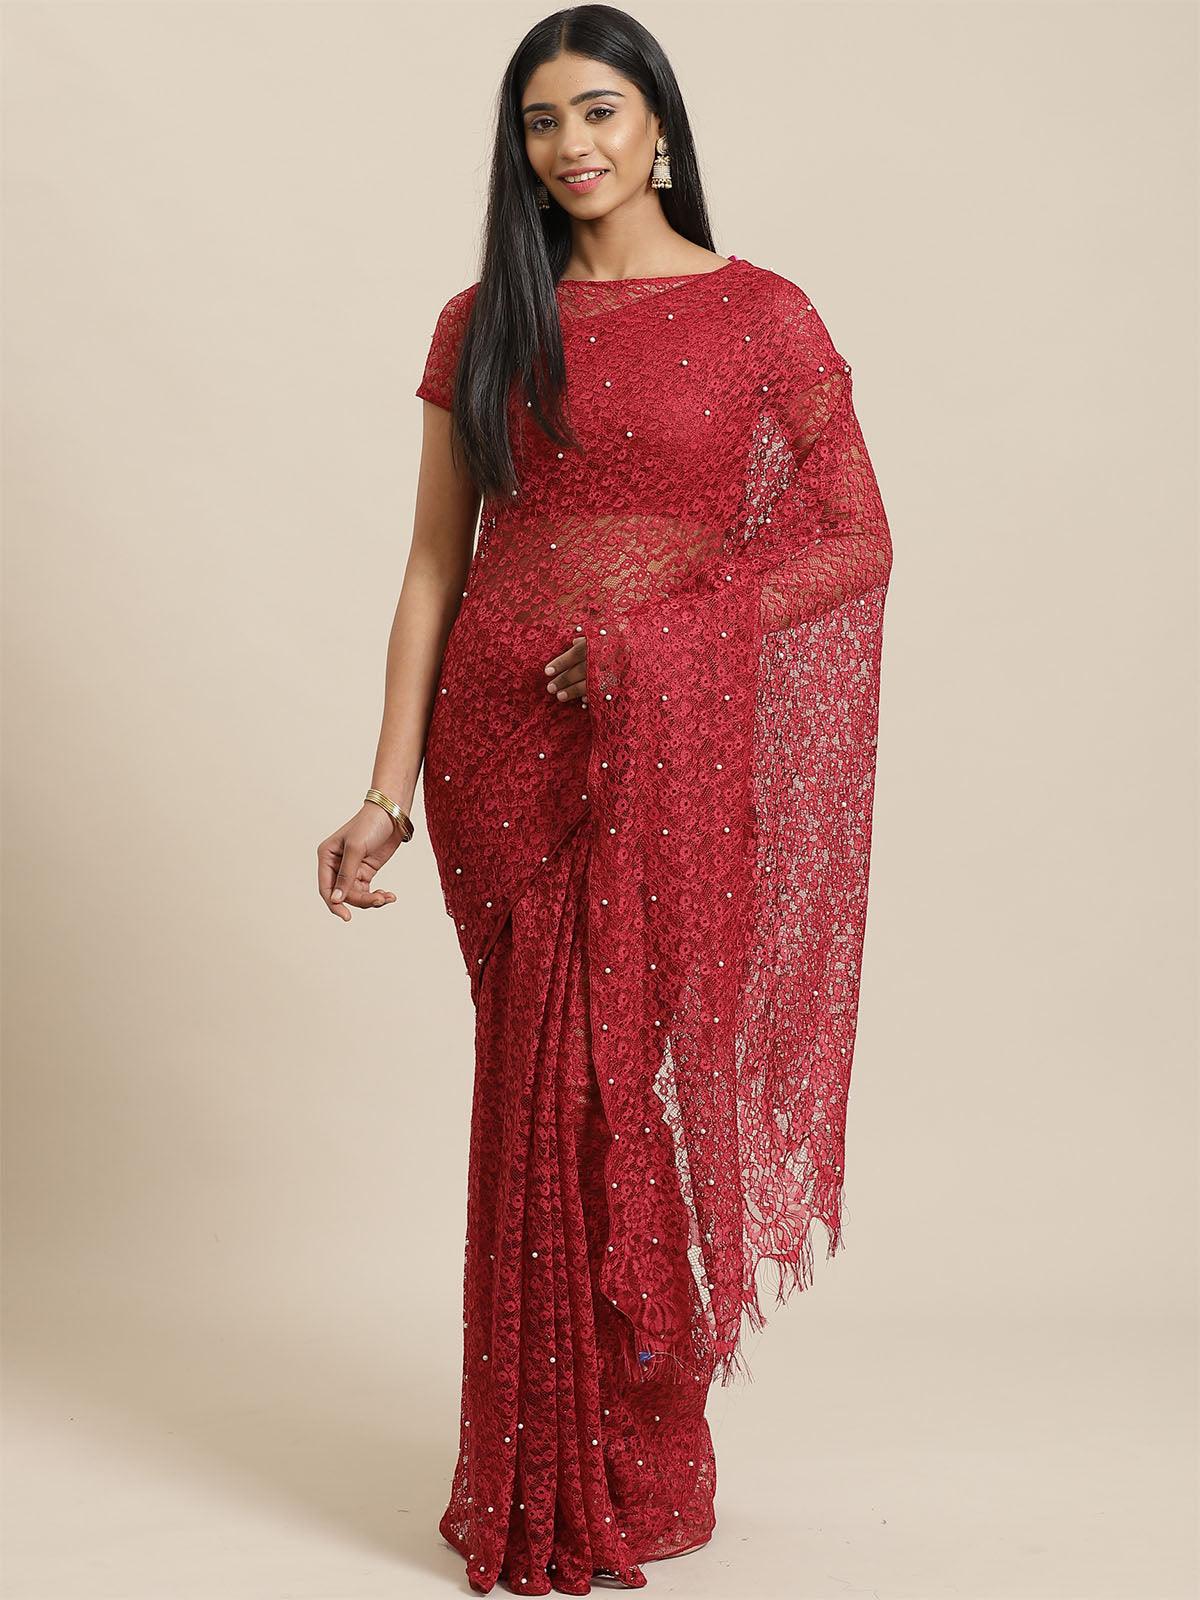 Women's Maroon Party Wear Net(Super Net) Solid Saree With Unstitched Blouse - Odette